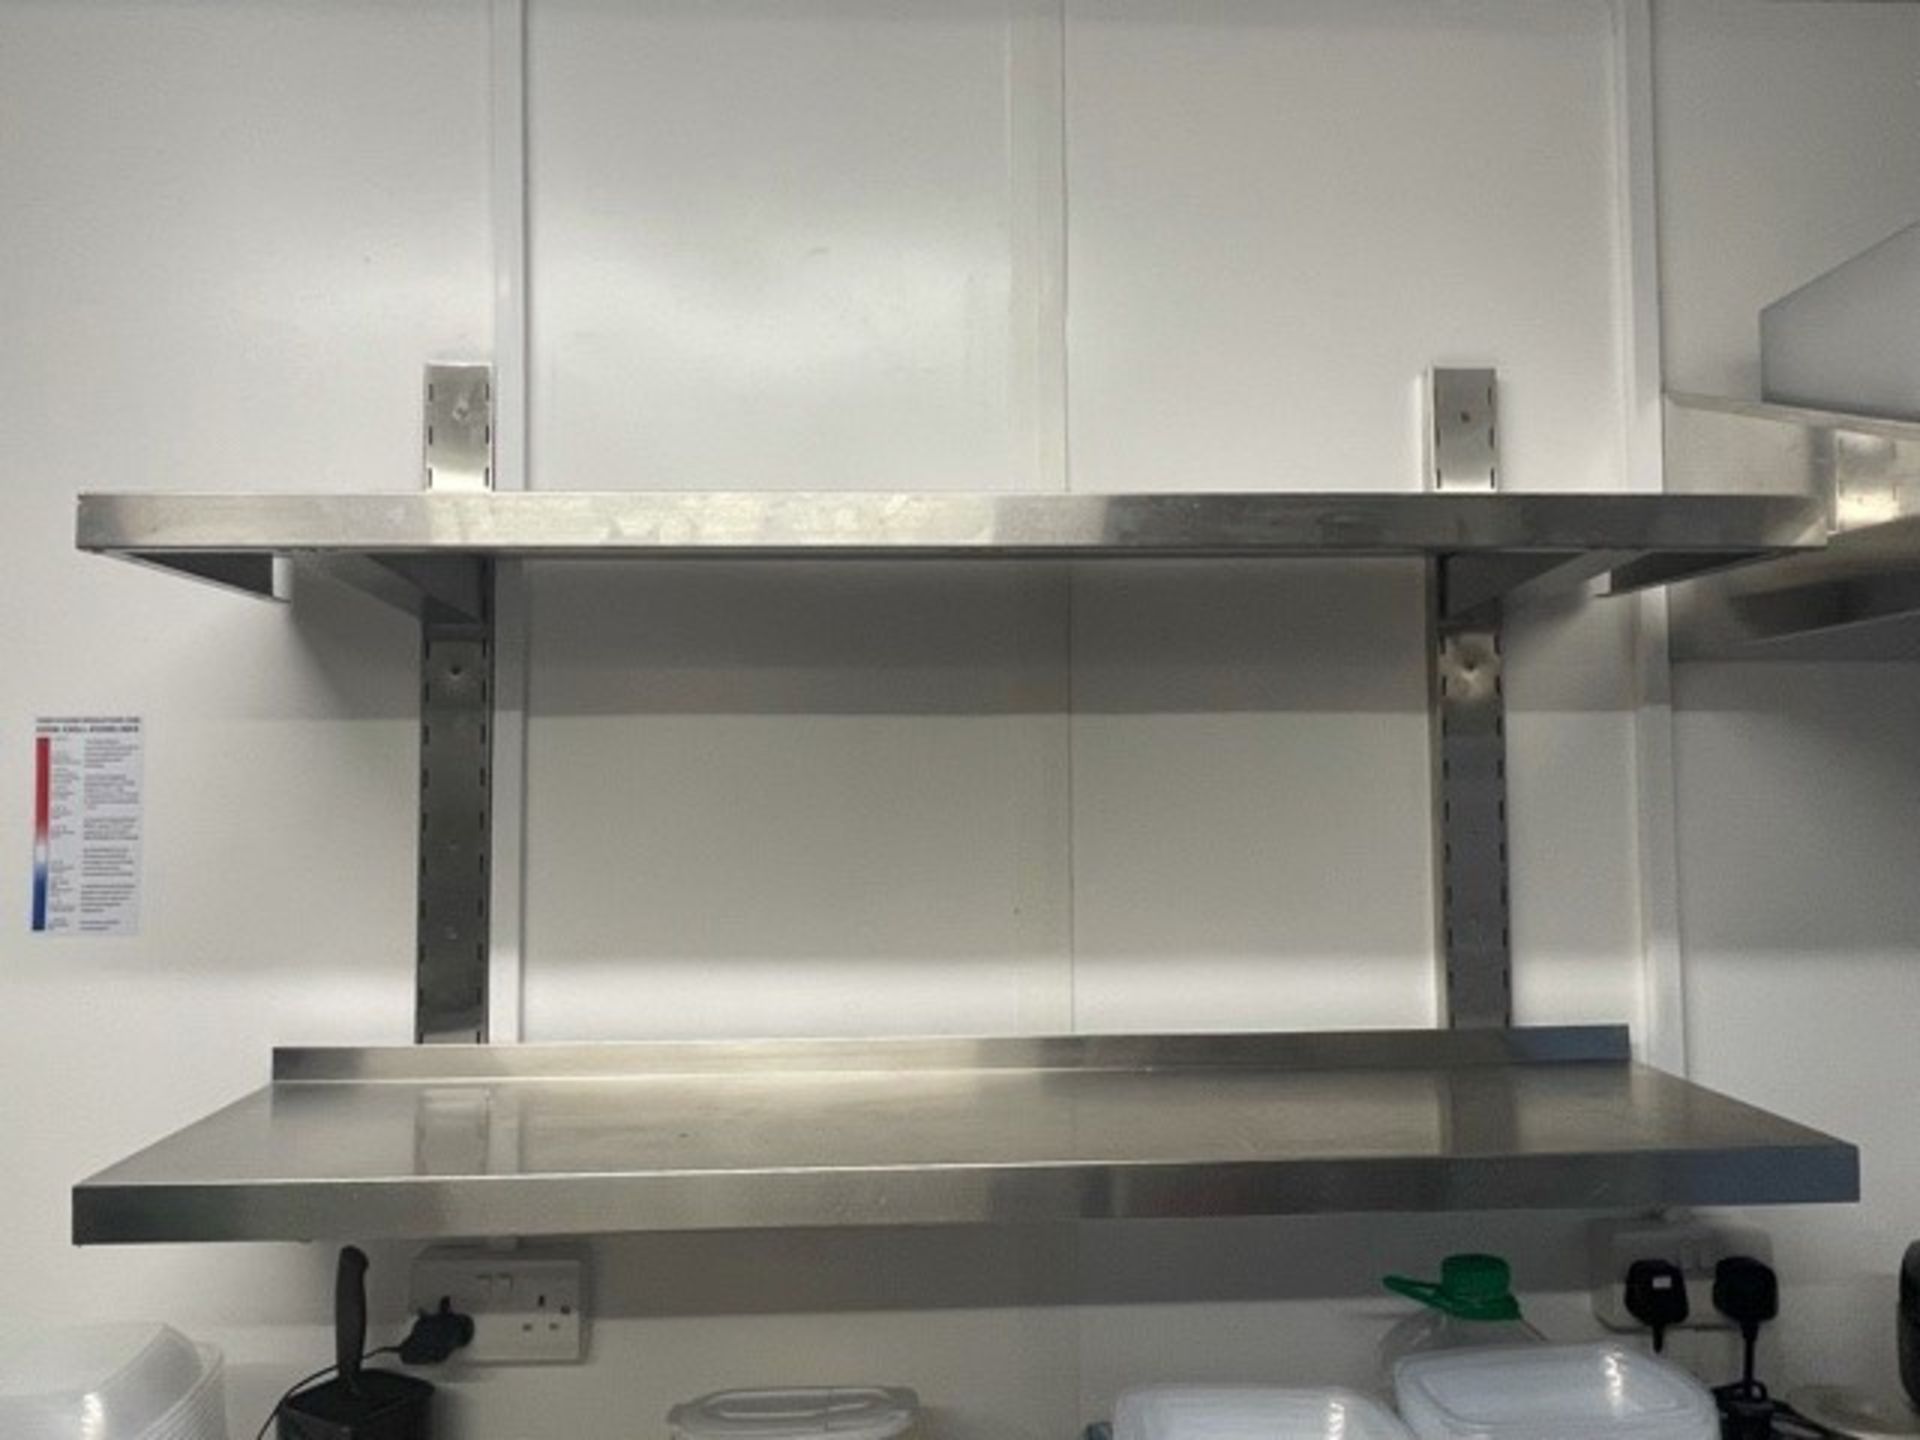 Stainless Steel Wall Shelf 2 Levels